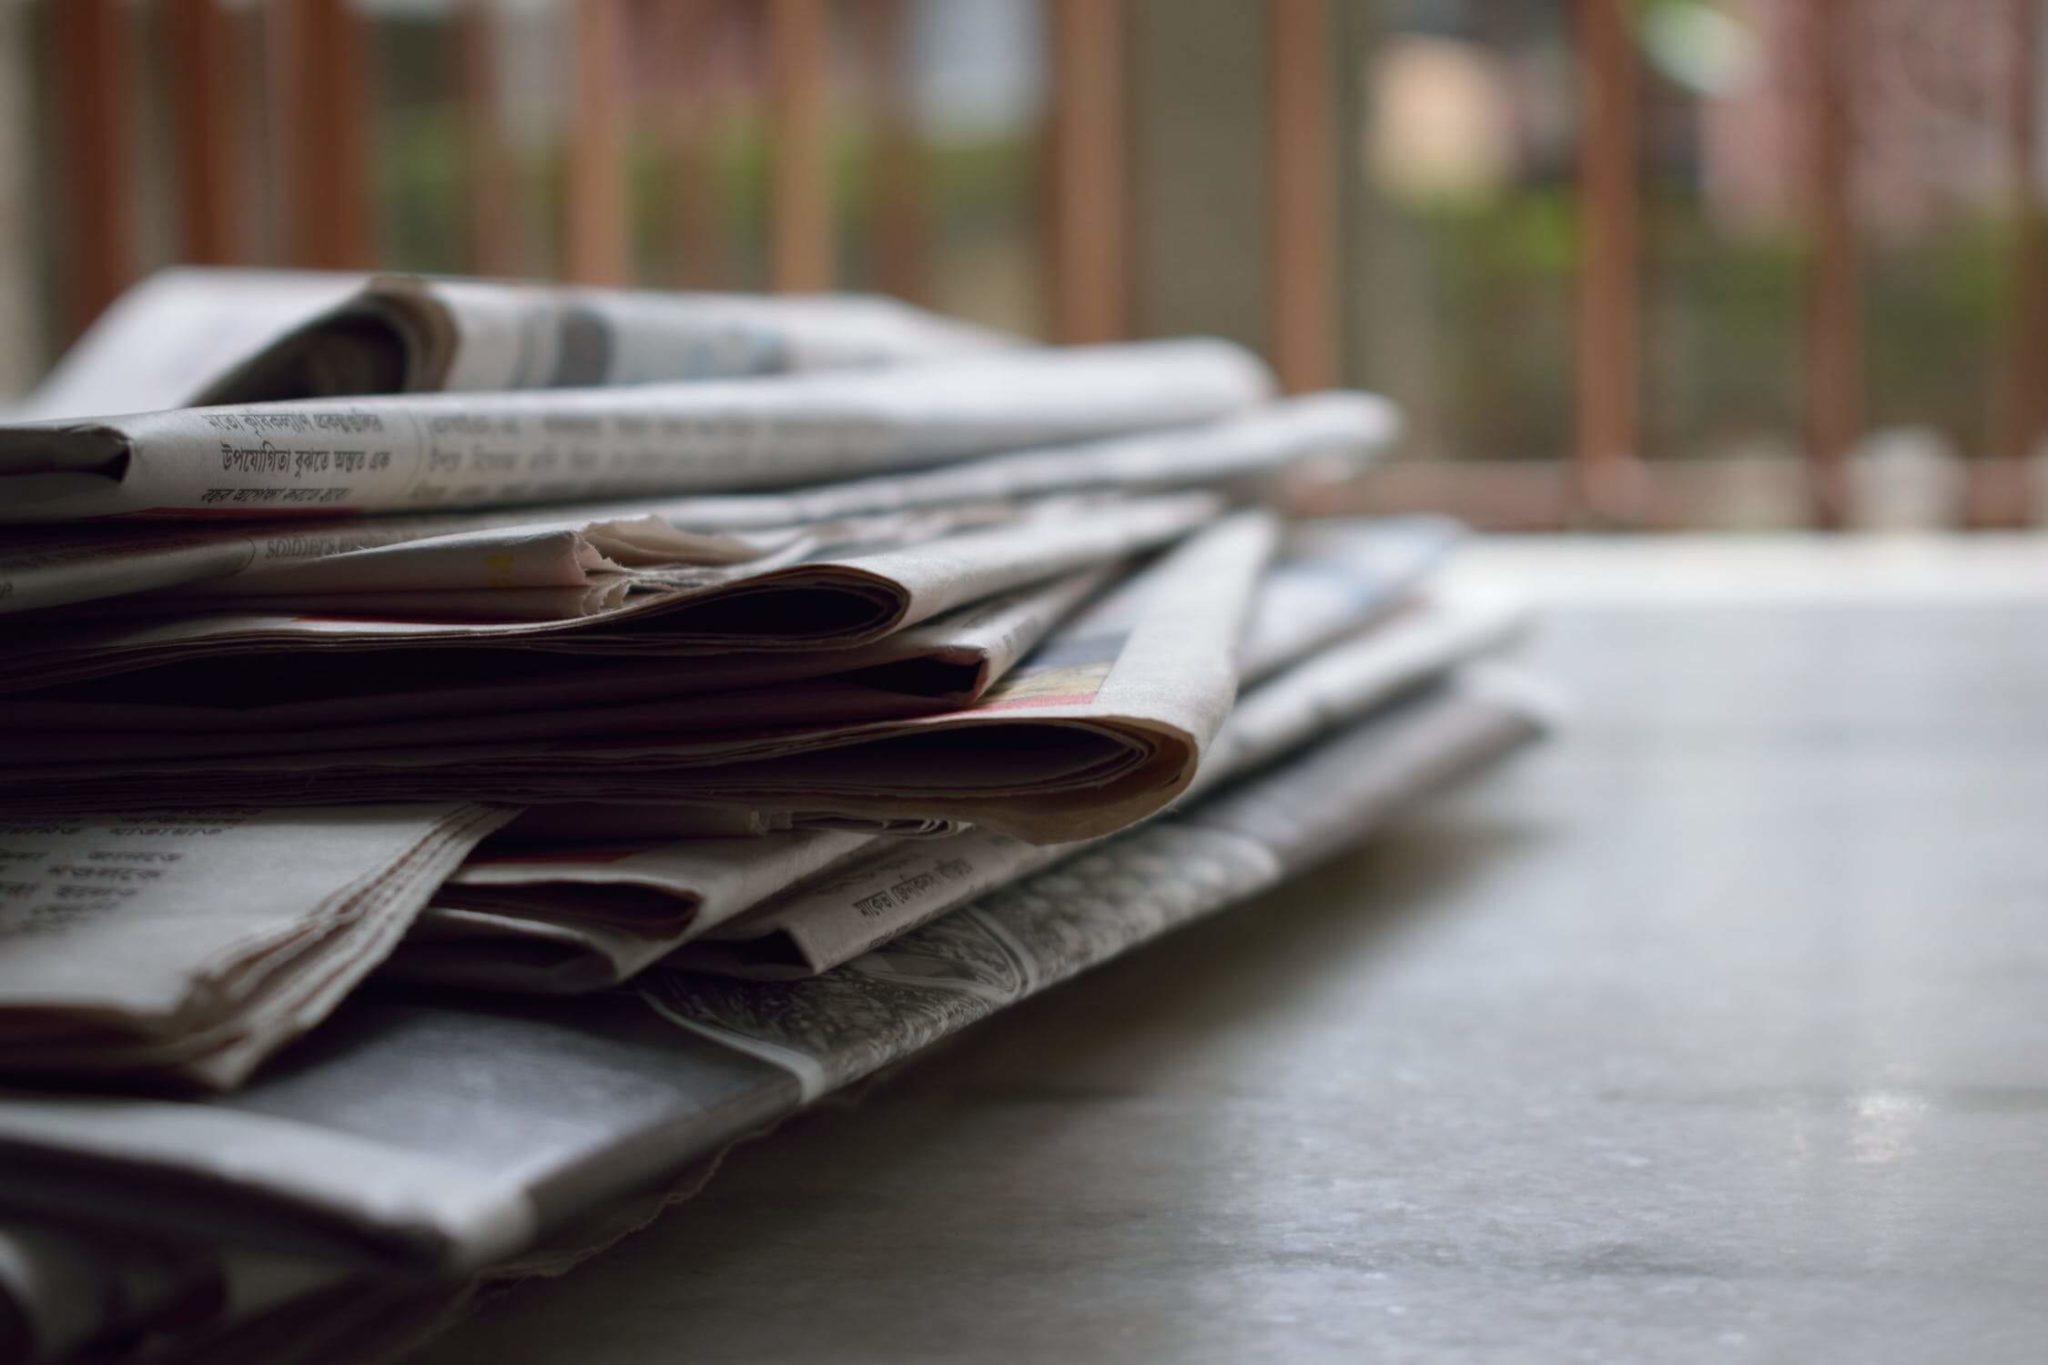 How To Promote A Press Release - Smart Ways To Refine Your Brand